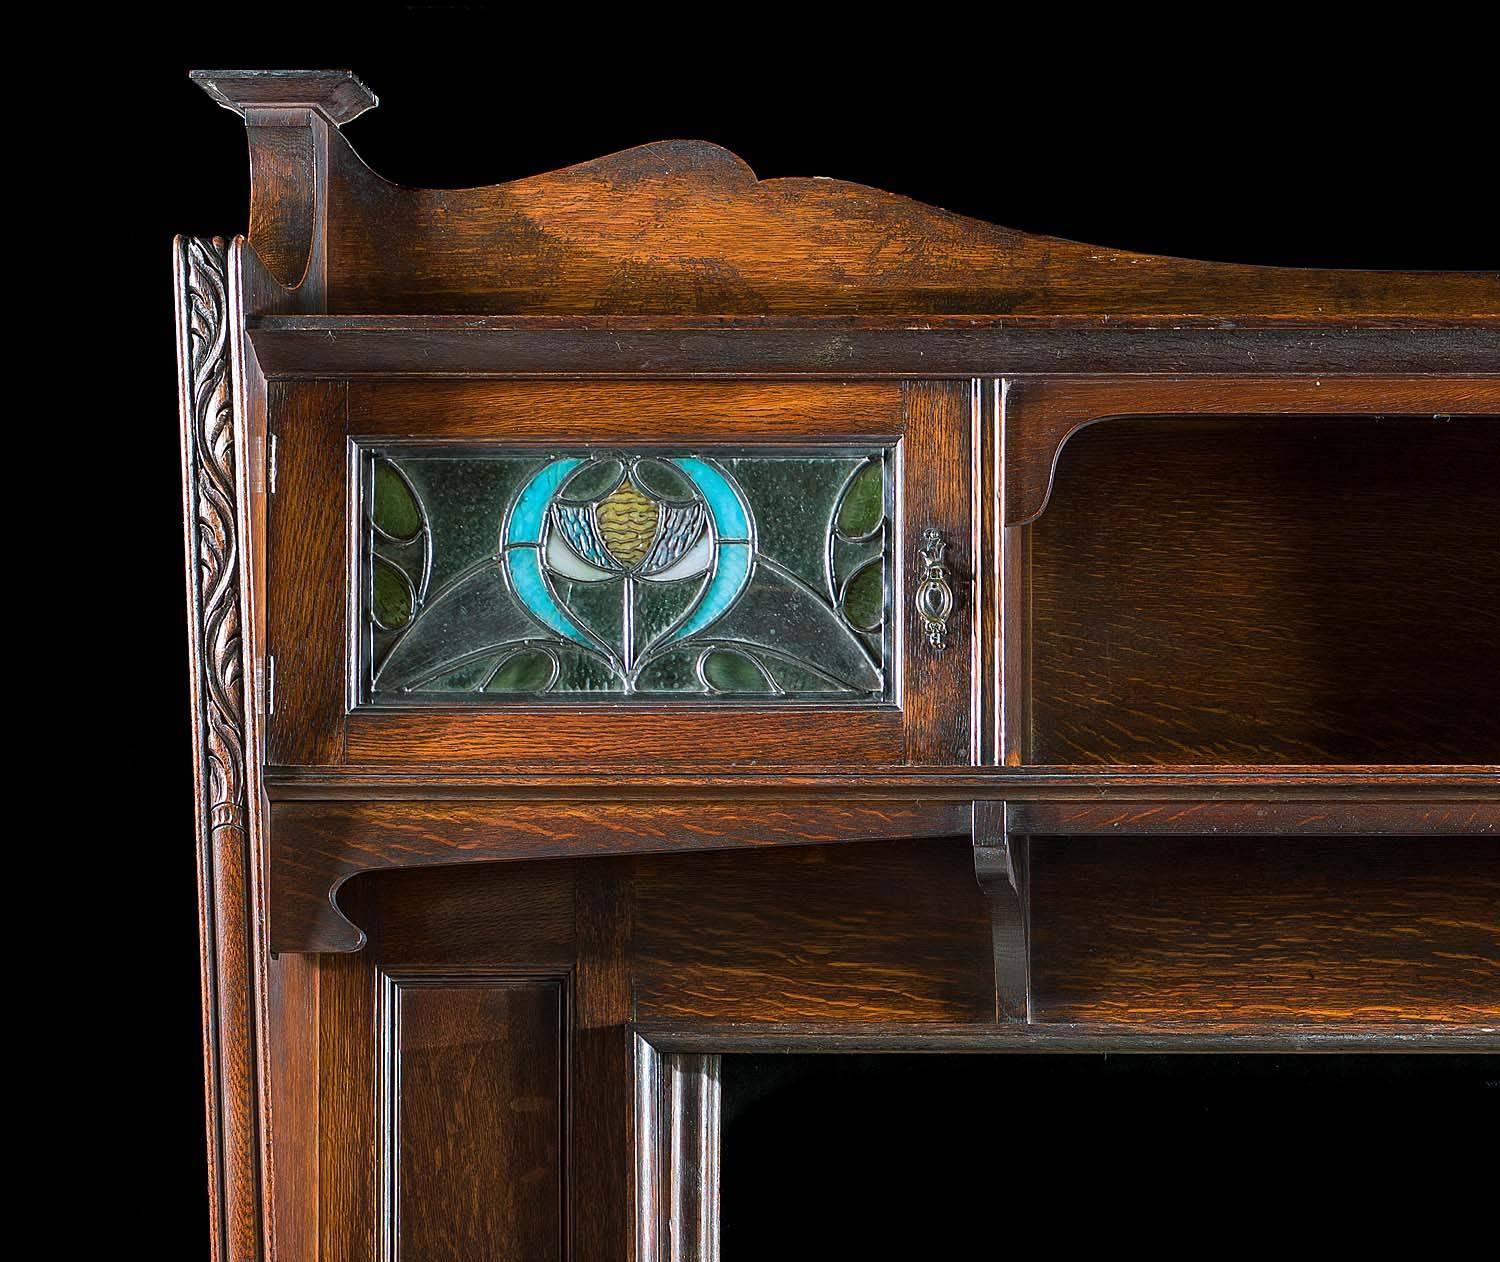 An Arts & Crafts oak fireplace surround in the manner of the Cheshire designer
George Faulkner Armitage (1849-1937), with a deep moulded shelf above a pair of cupboards with stained and leaded glass doors set either side of the open lower shelf